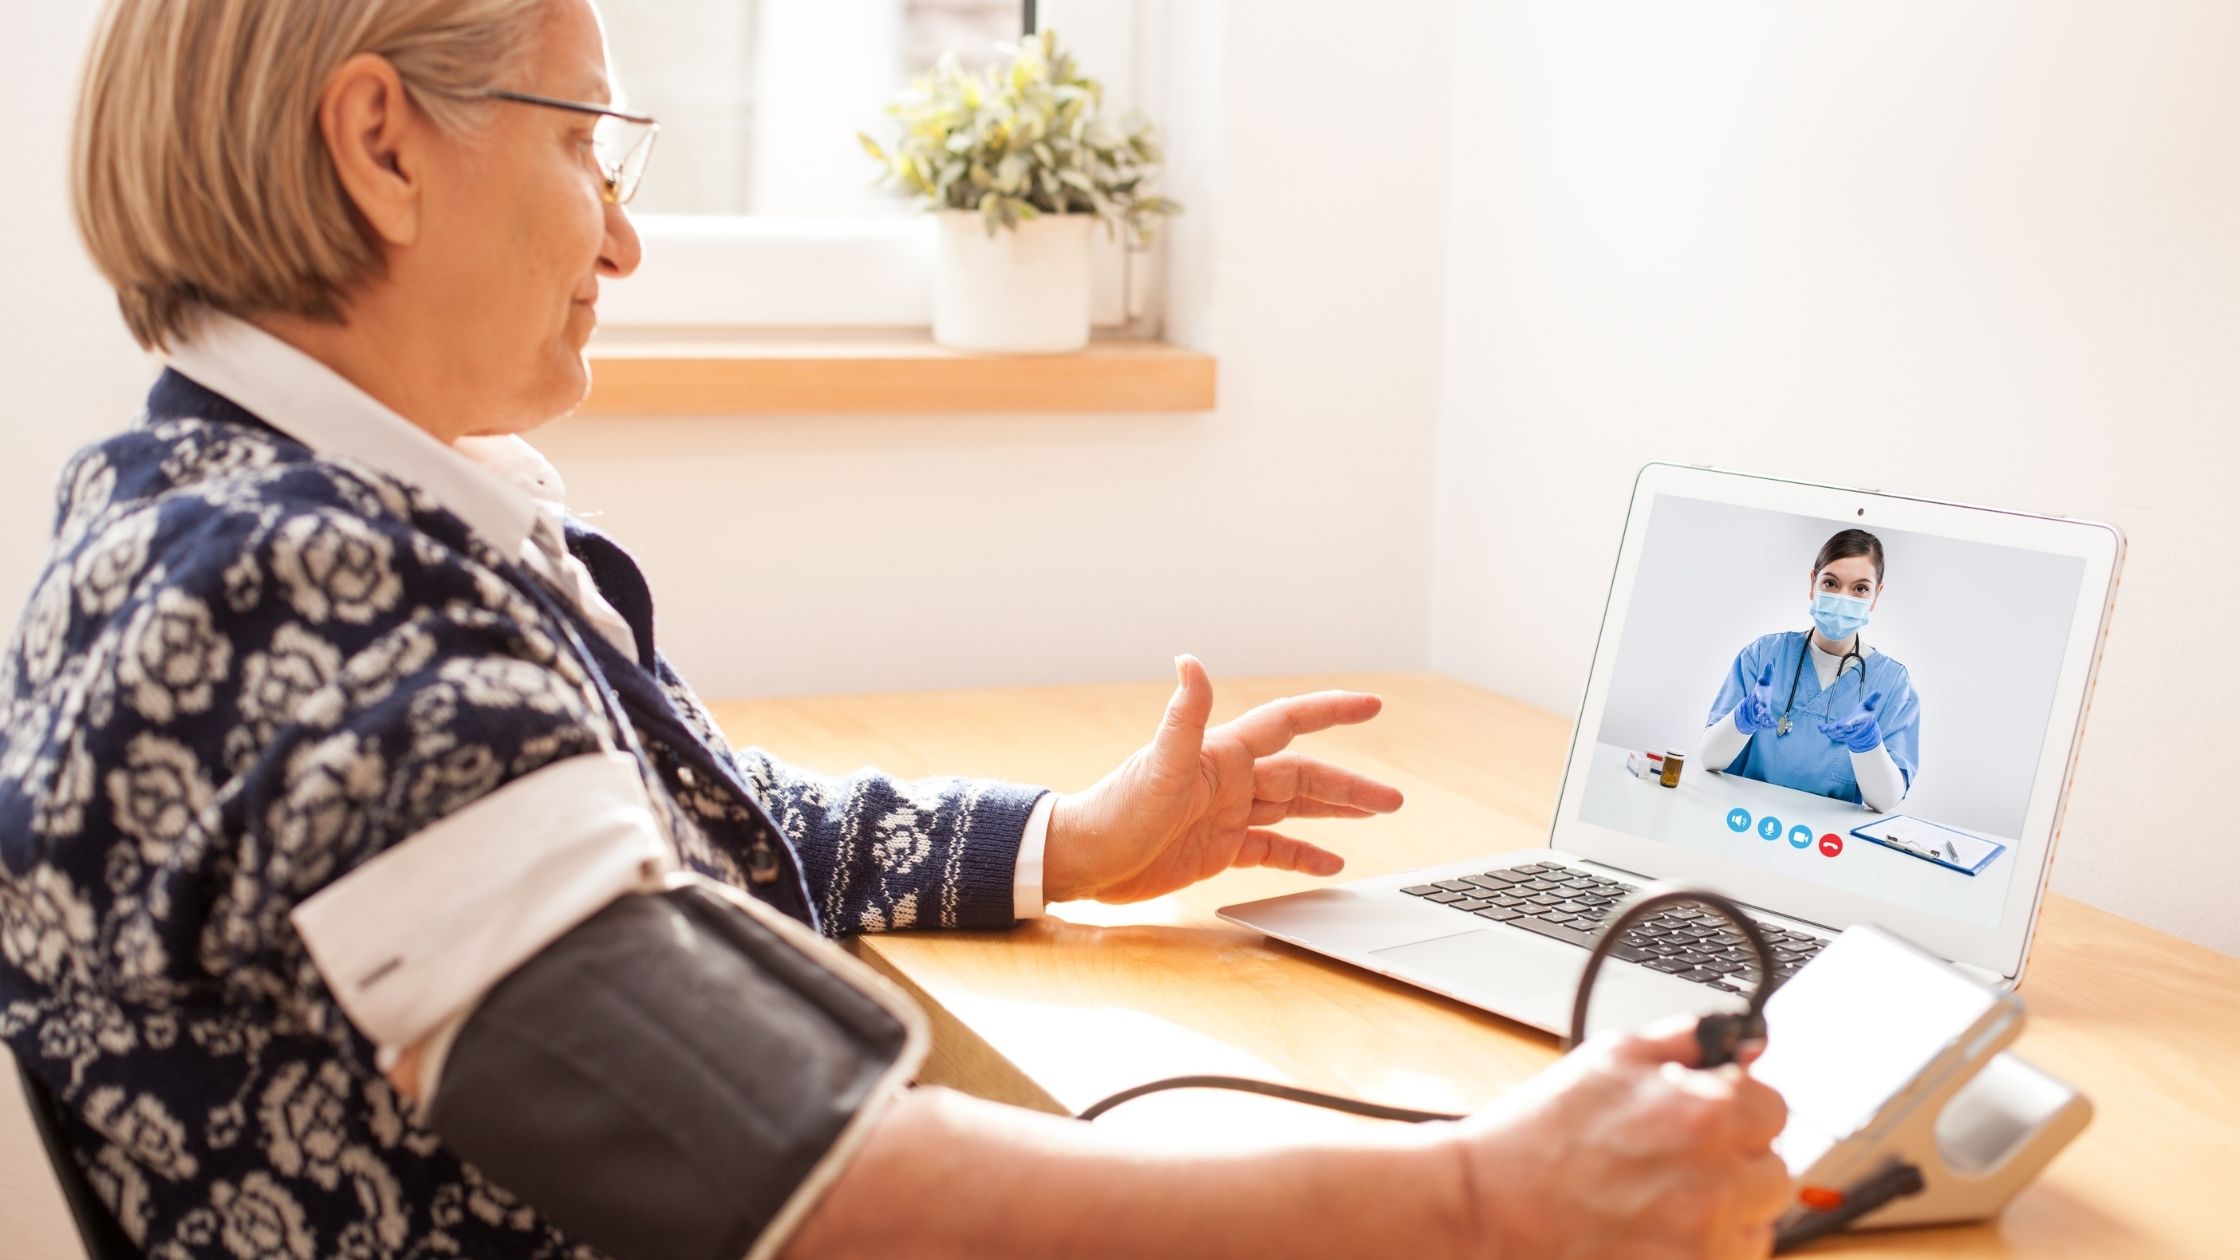 Elderly senior retired woman using sphygmomanometer blood pressure monitor to measure heart rate pules,talking to female e-doctor via online video call help line,self-monitoring remote telemedicine